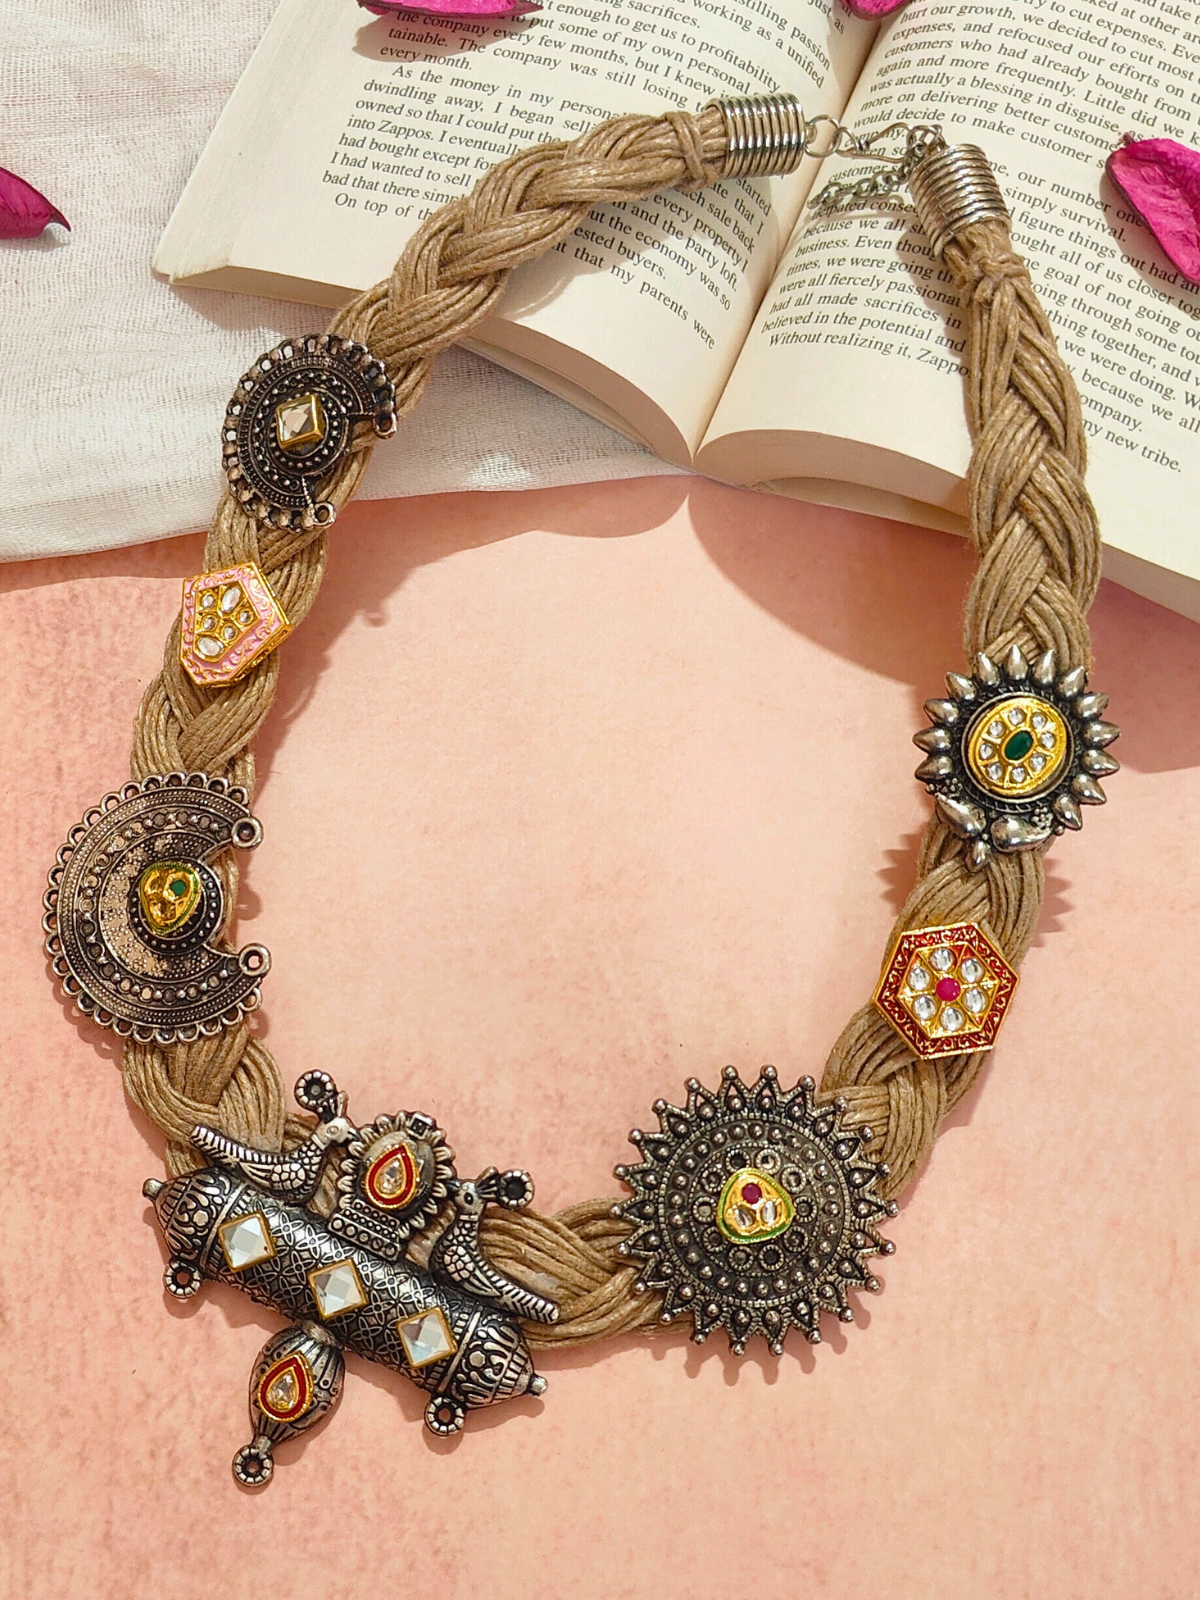 The Peacock In Jute Branch Necklace